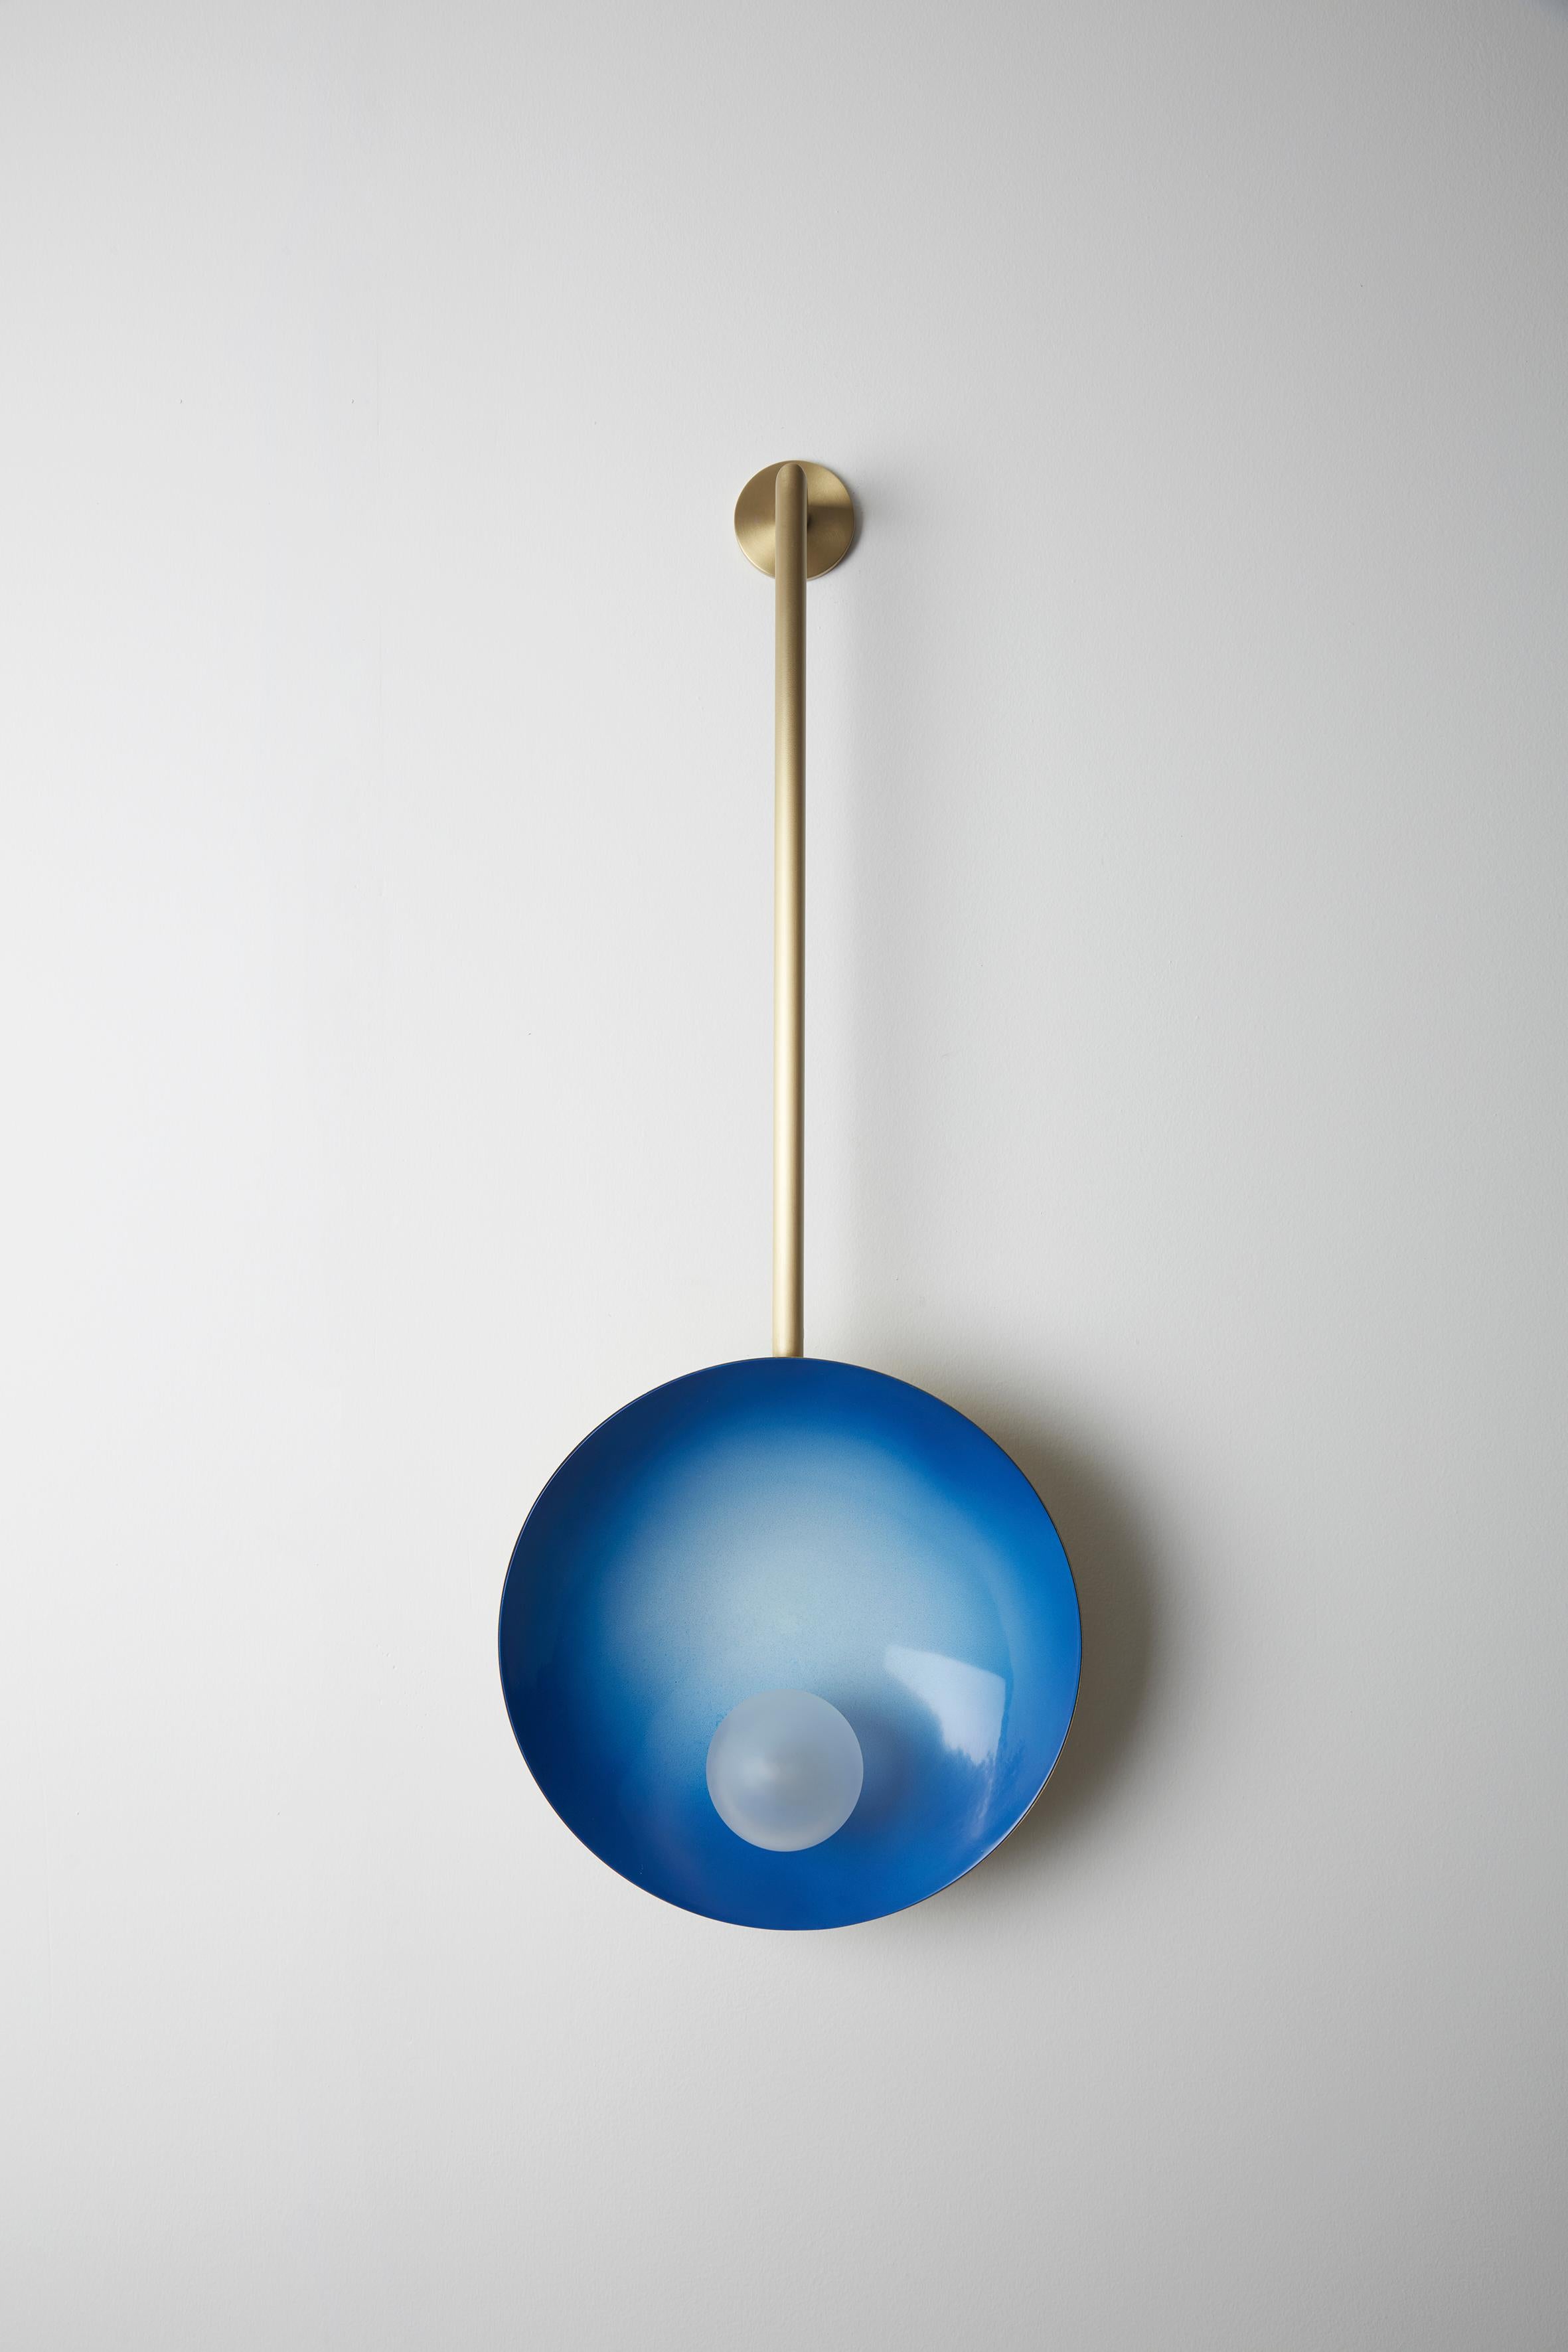 Oyster wall mounted electric blue, Carla Baz
Dimensions: ø 30 x H 78 x D 14 cm
Weight: 2 kg
Material: Brass, blown satin glass globes

Oyster is a series of sculptural lighting pieces that were developed in 2016. Wanting to explore the idea of